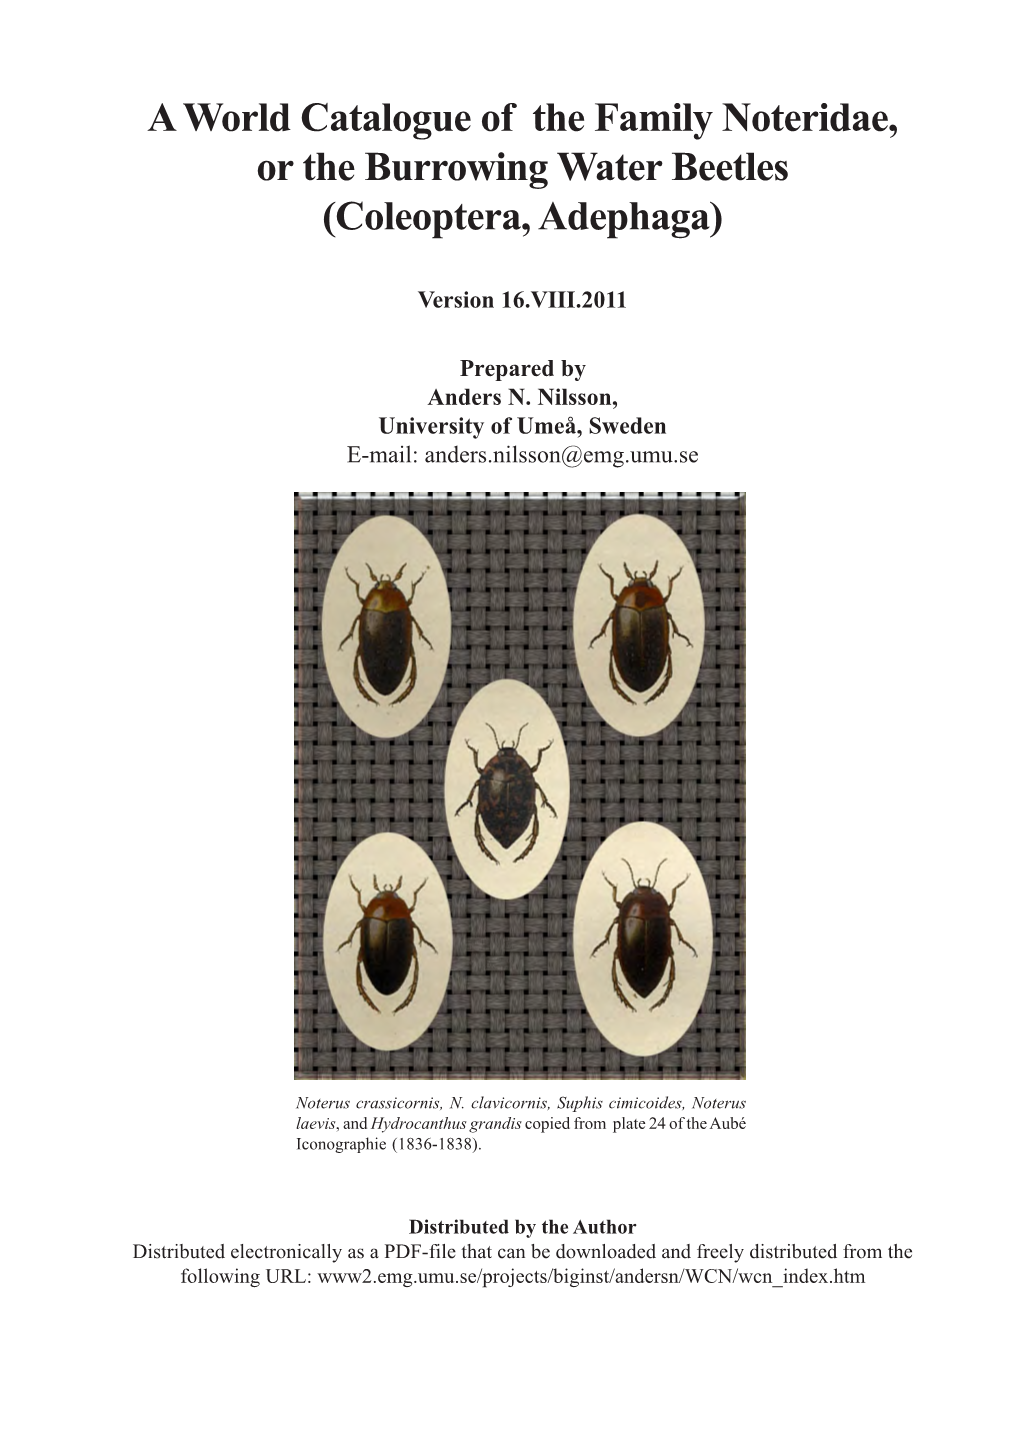 A World Catalogue of the Family Noteridae, Or the Burrowing Water Beetles (Coleoptera, Adephaga)